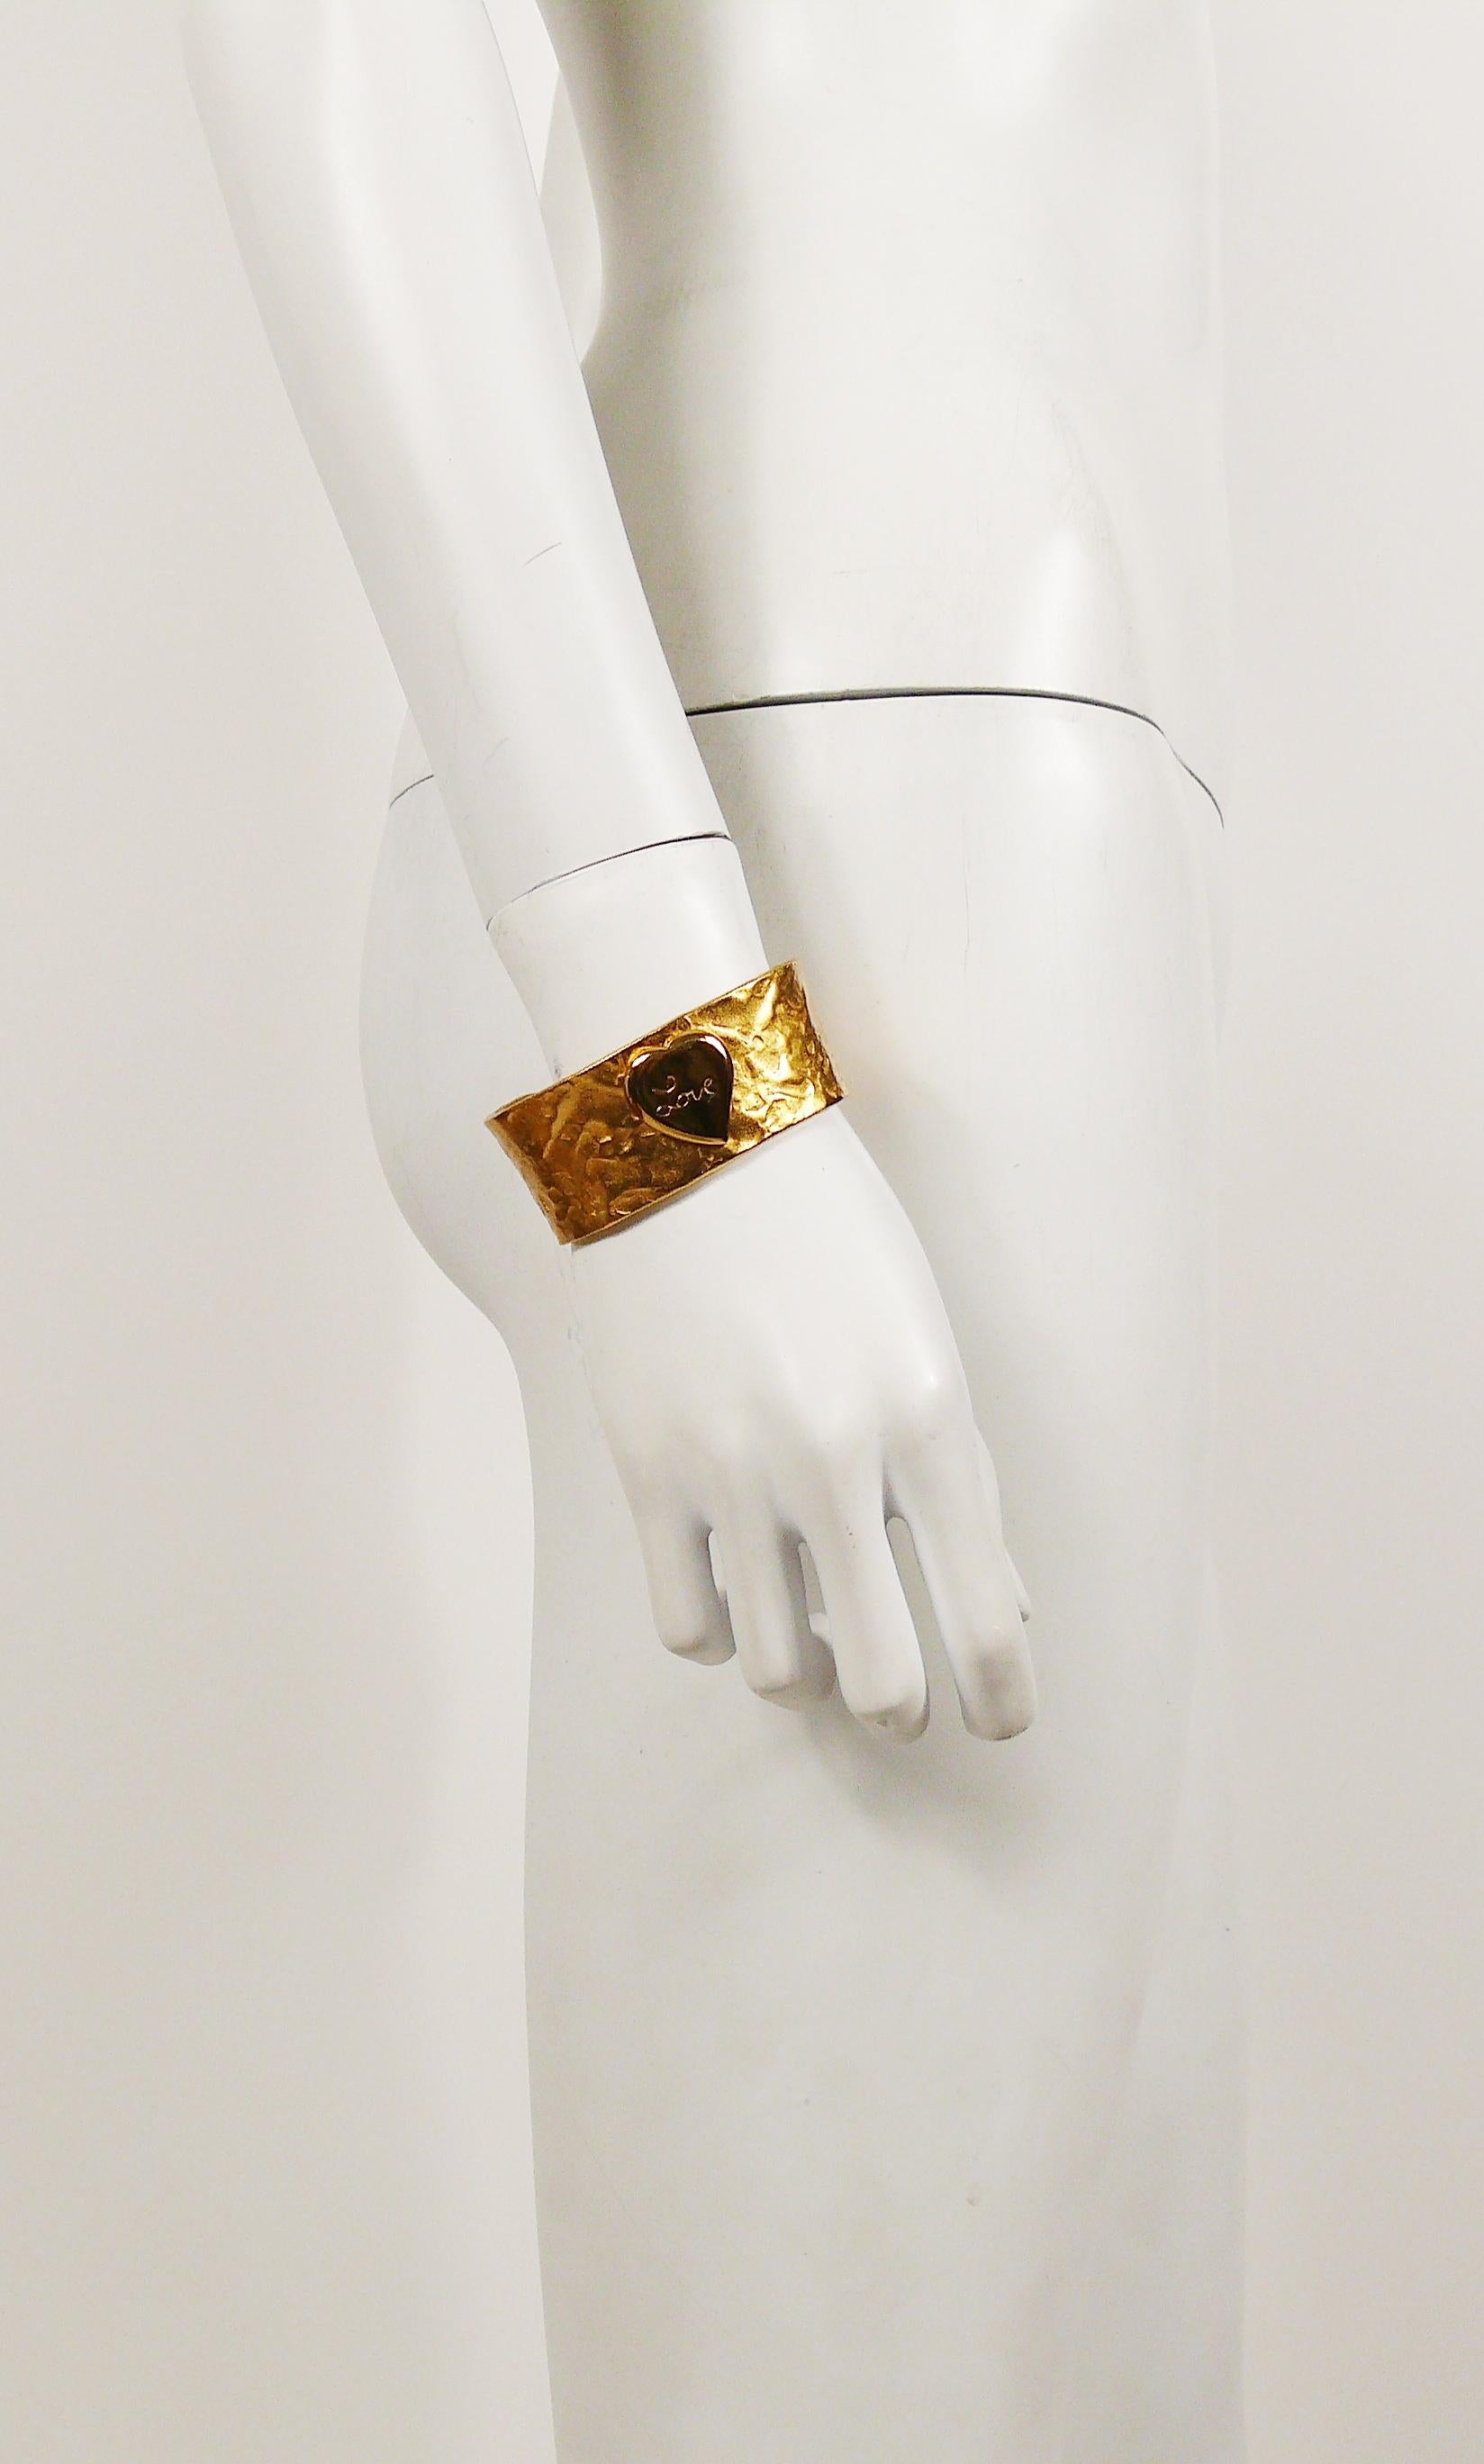 YVES SAINT LAURENT vintage hammered gilt cuff bracelet featuring a heart centrepiece with engraved LOVE.

Embossed YSL Made in France.

Indicative measurements : inner max. width approx. 6.4 cm (2.52 inches) / height approx. 2.8 cm (1.10